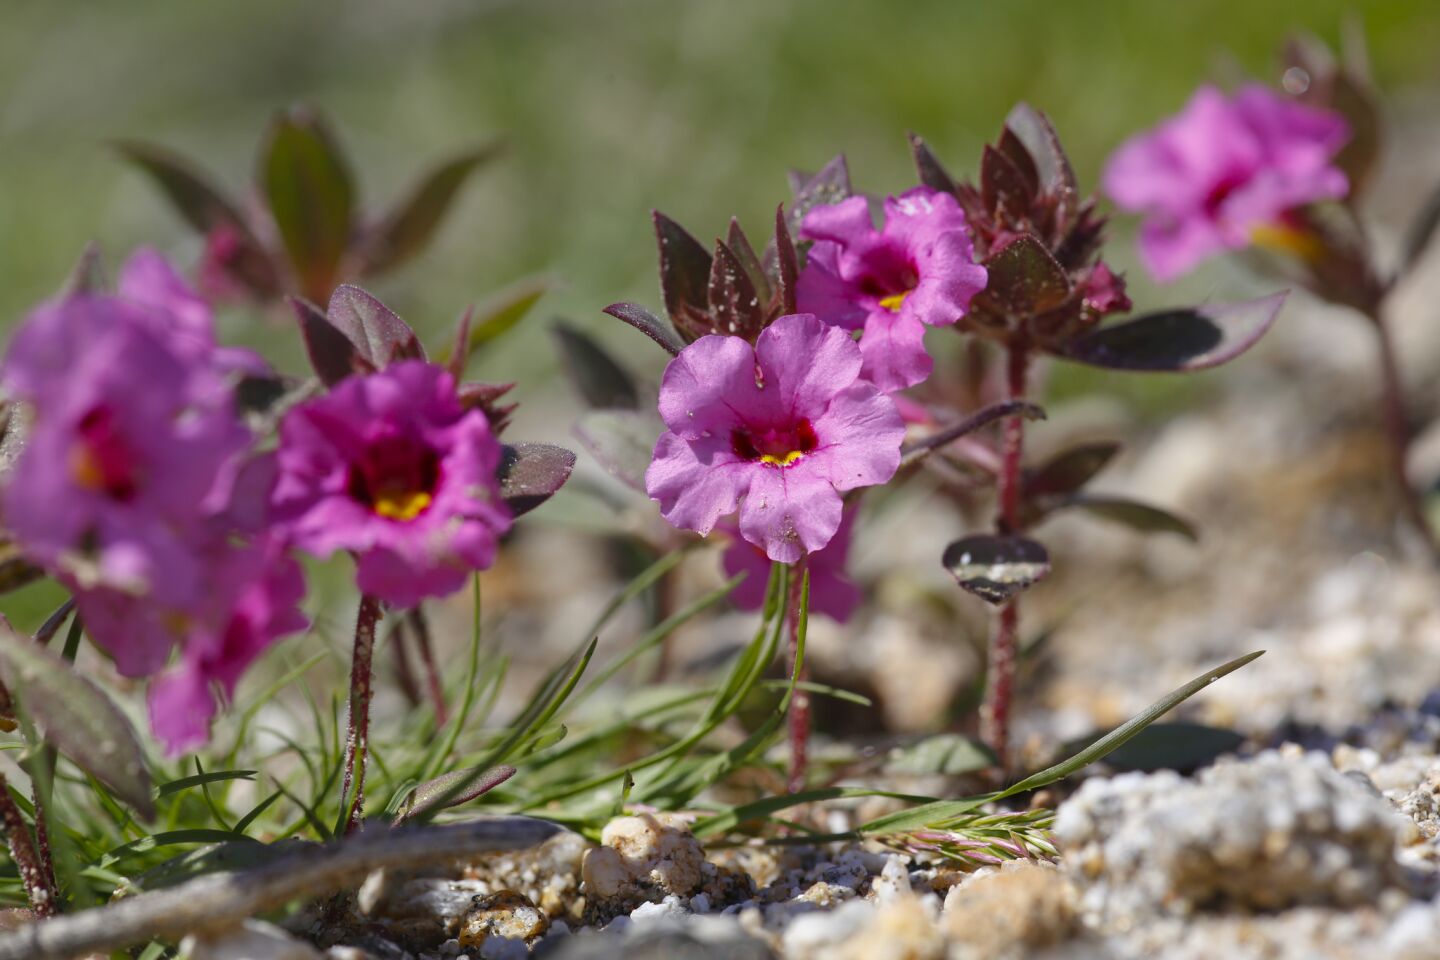 Small belly flowers are beginning to bloom at Anza-Borrego Desert.